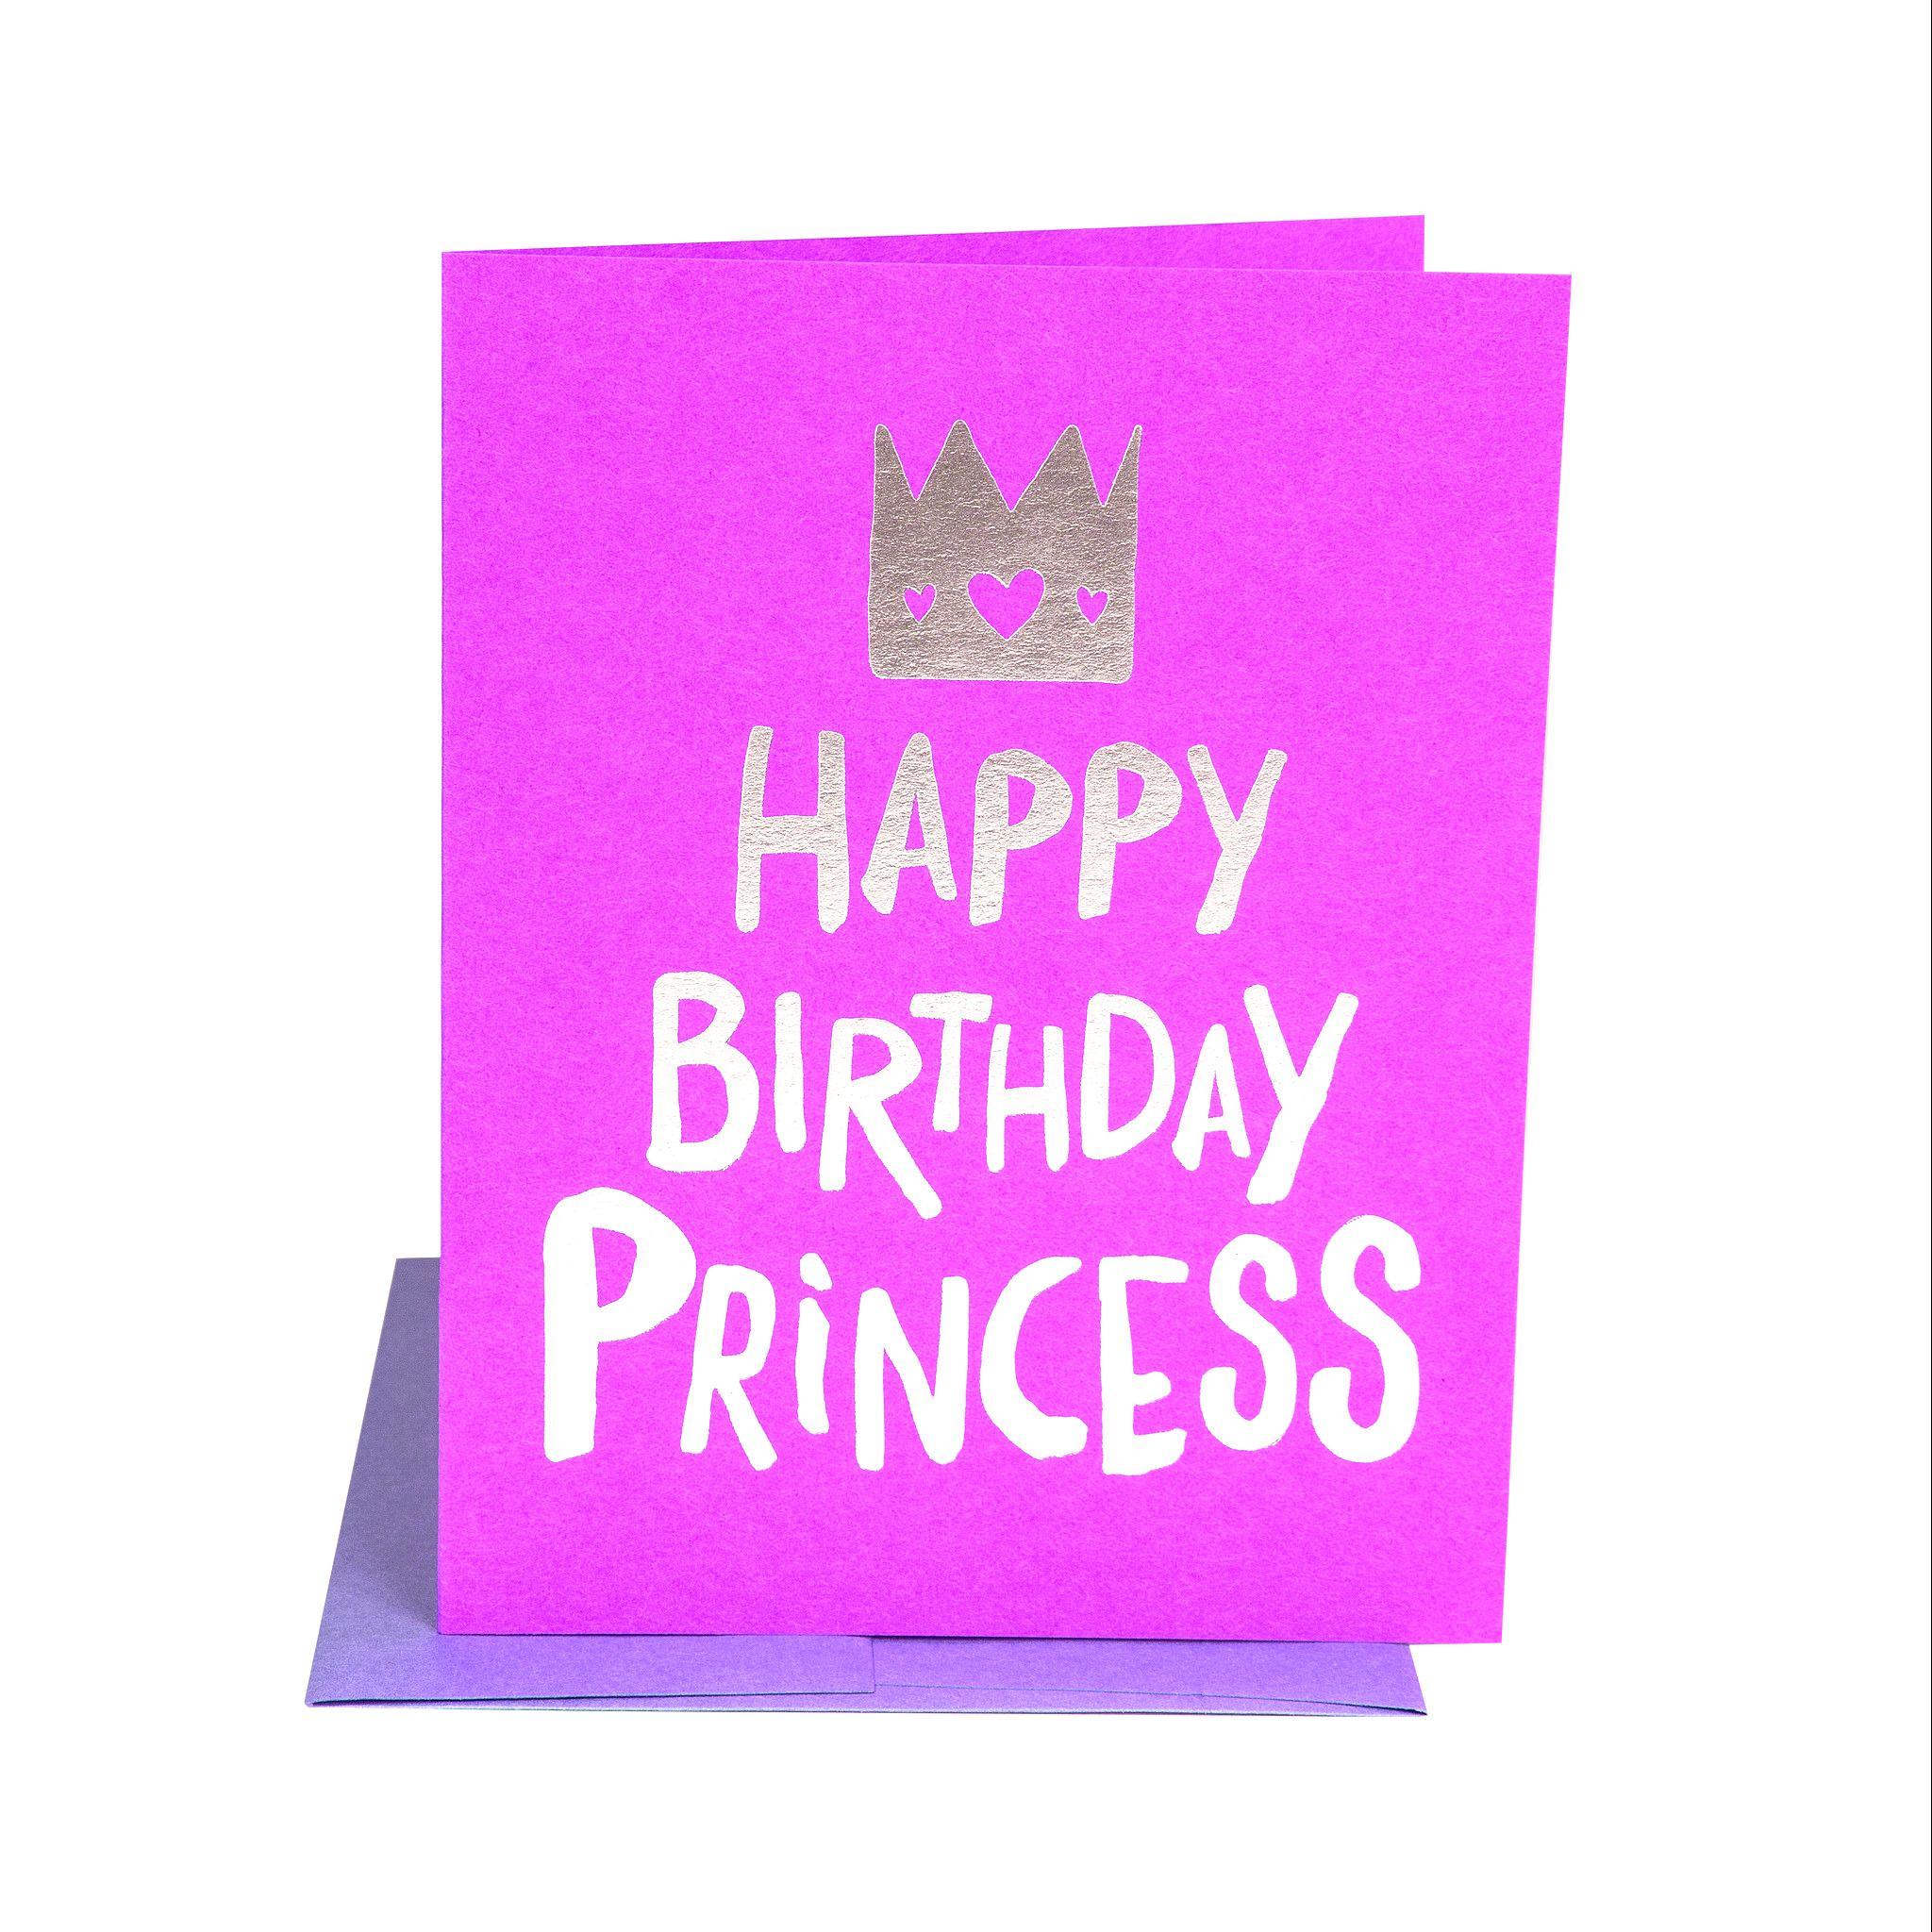 Happy Birthday Princess Messages, Quotes & Wallpaper